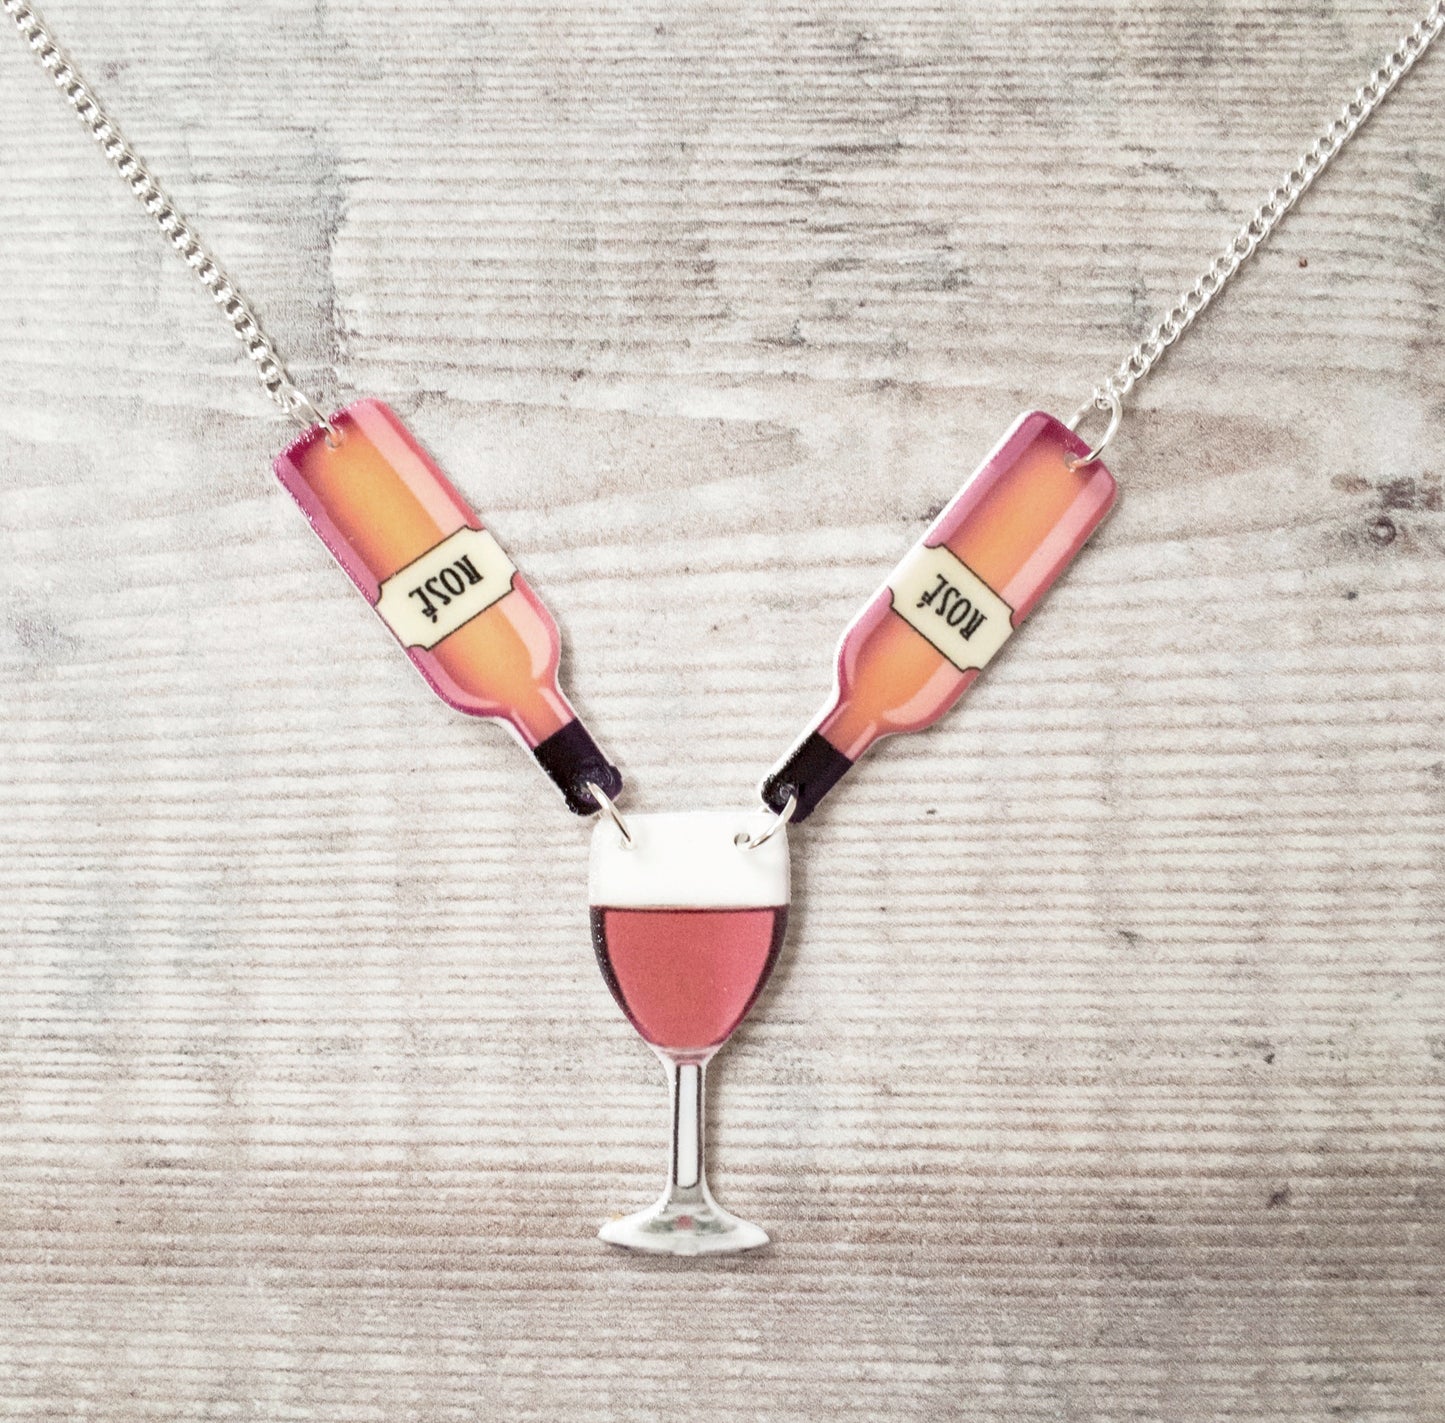 Rose wine necklace - Wine lover jewellery gift